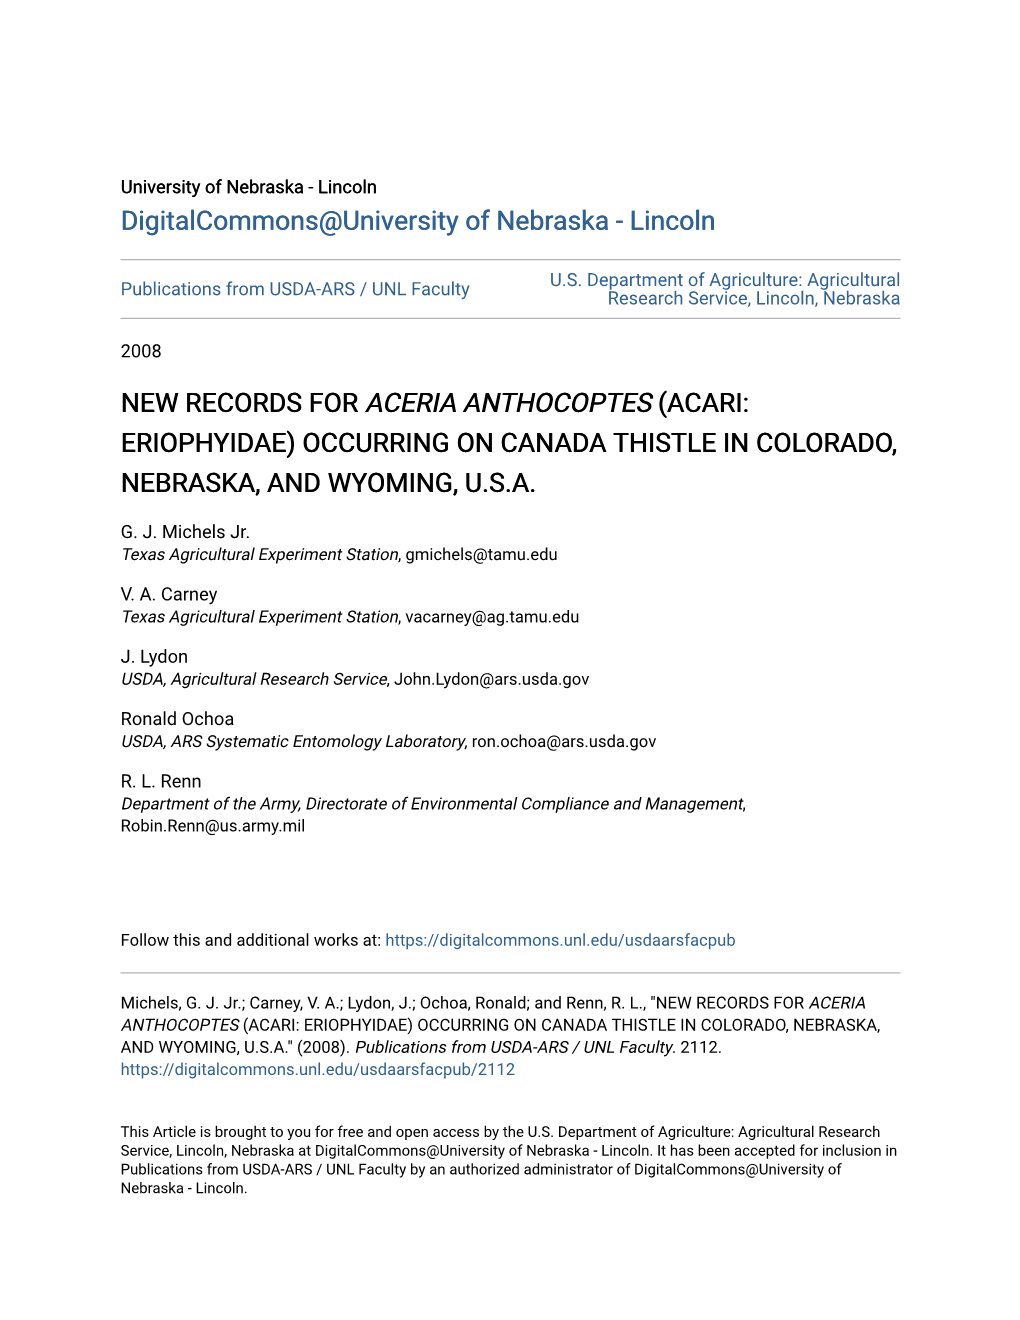 NEW RECORDS for &lt;I&gt;ACERIA ANTHOCOPTES&lt;/I&gt; (ACARI: ERIOPHYIDAE) OCCURRING on CANADA THISTLE in COLORADO, NEBRASKA, AN